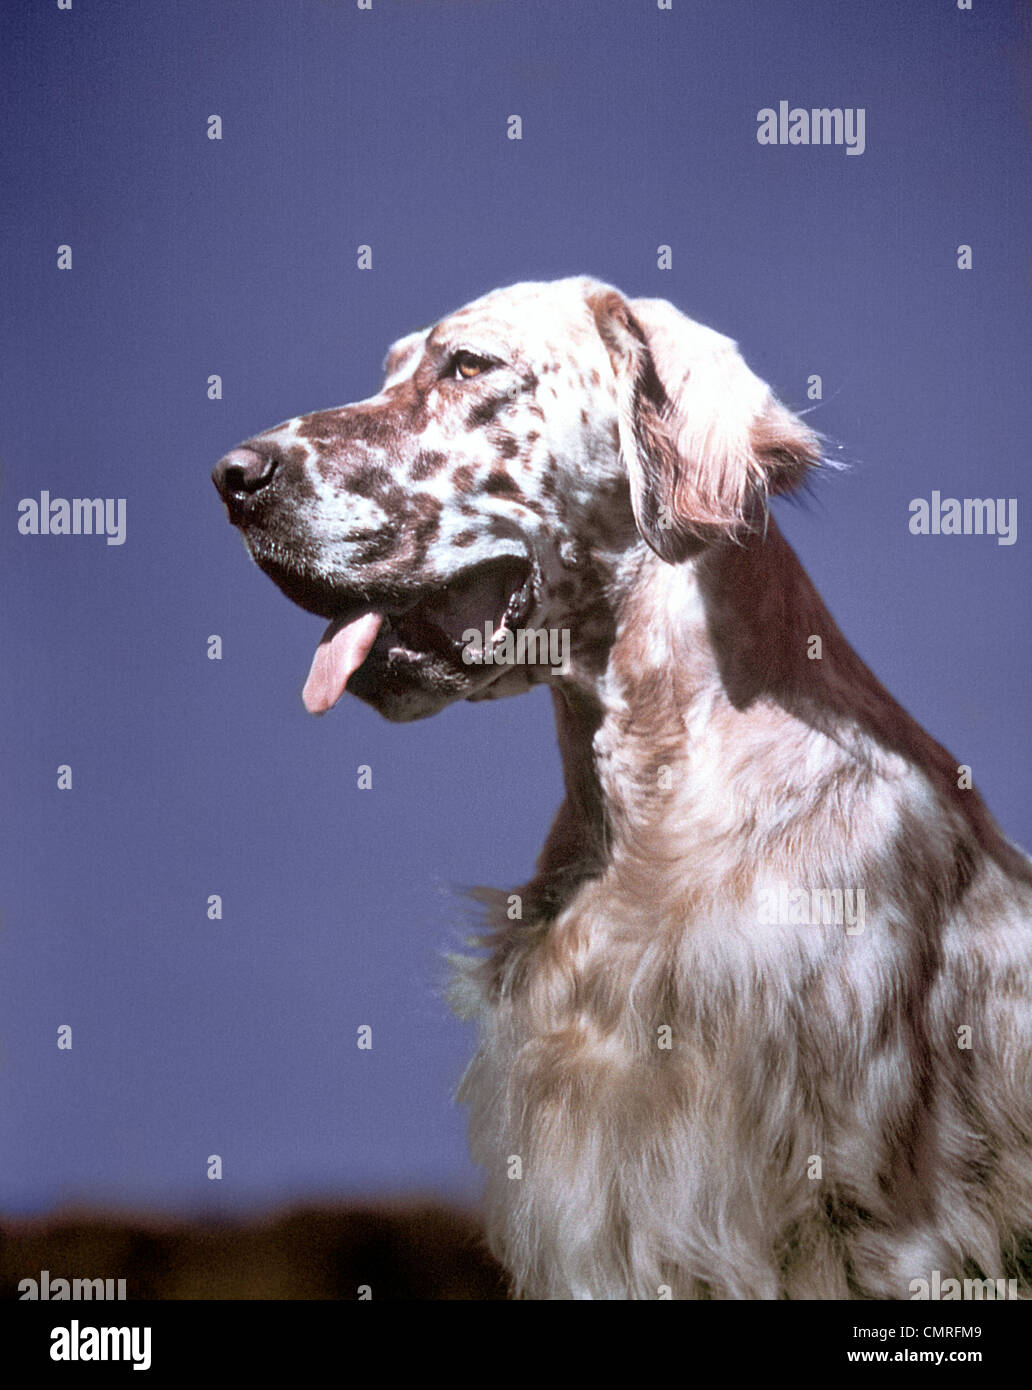 1940s PROFILE PORTRAIT SPOTTED ENGLISH SETTER HUNTING DOG Stock Photo